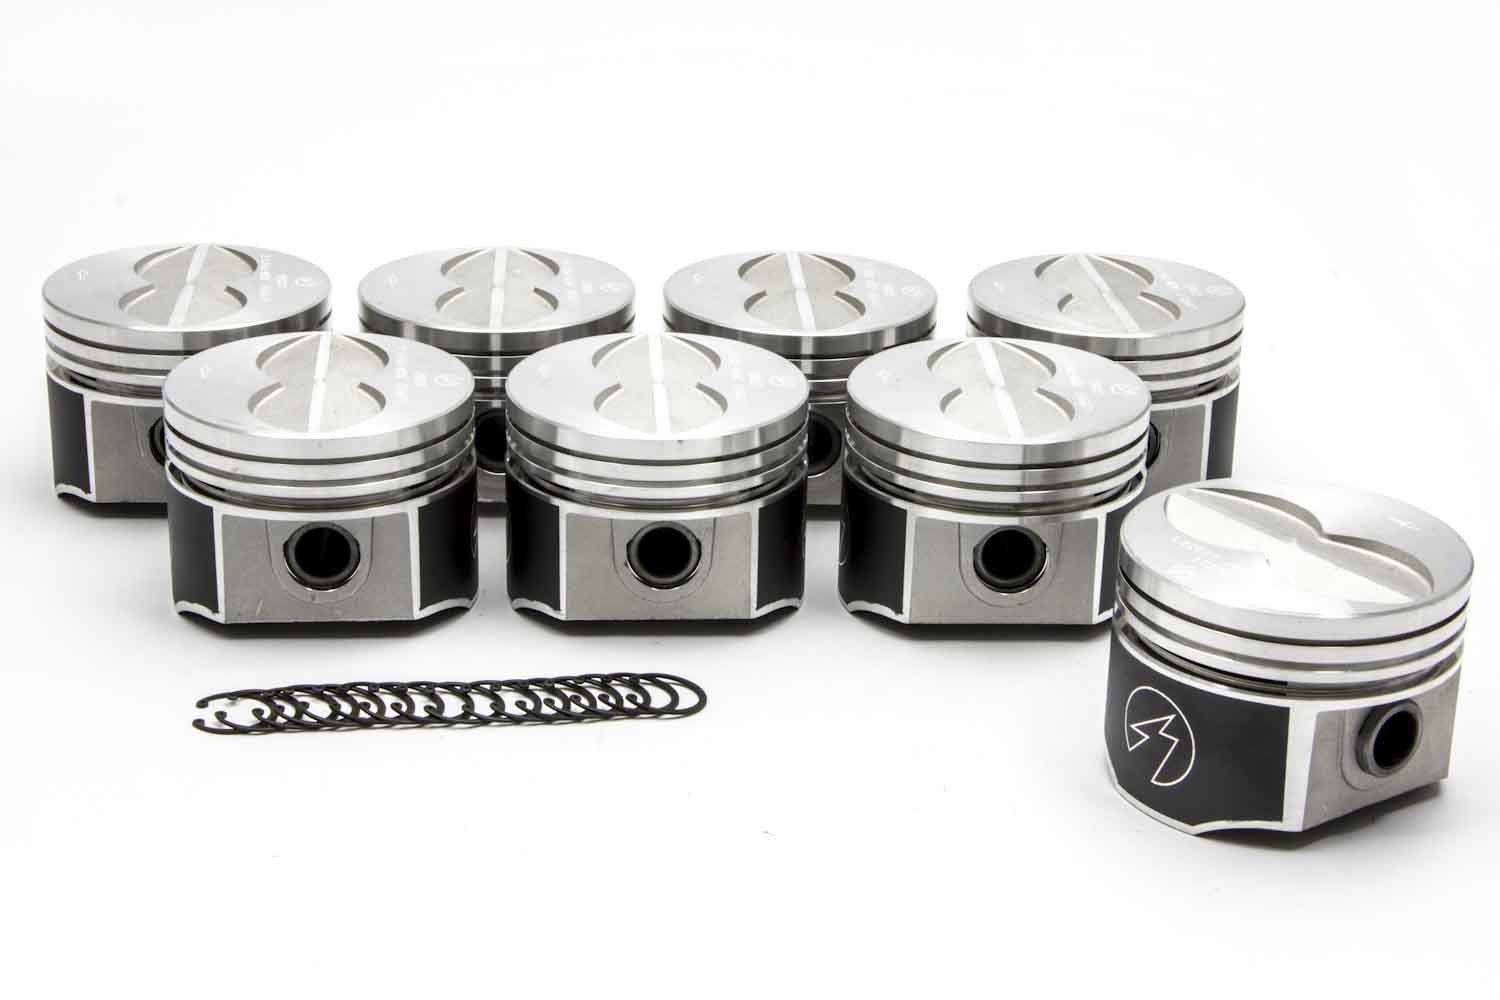 Sealed Power L2291F40 Piston, Speed Pro, Forged, 4.090 in Bore, 5/64 x 3/32 x 3/16 in Ring Grooves, Minus 10.00 cc, Coated Skirt, Ford FE-Series, Set of 8